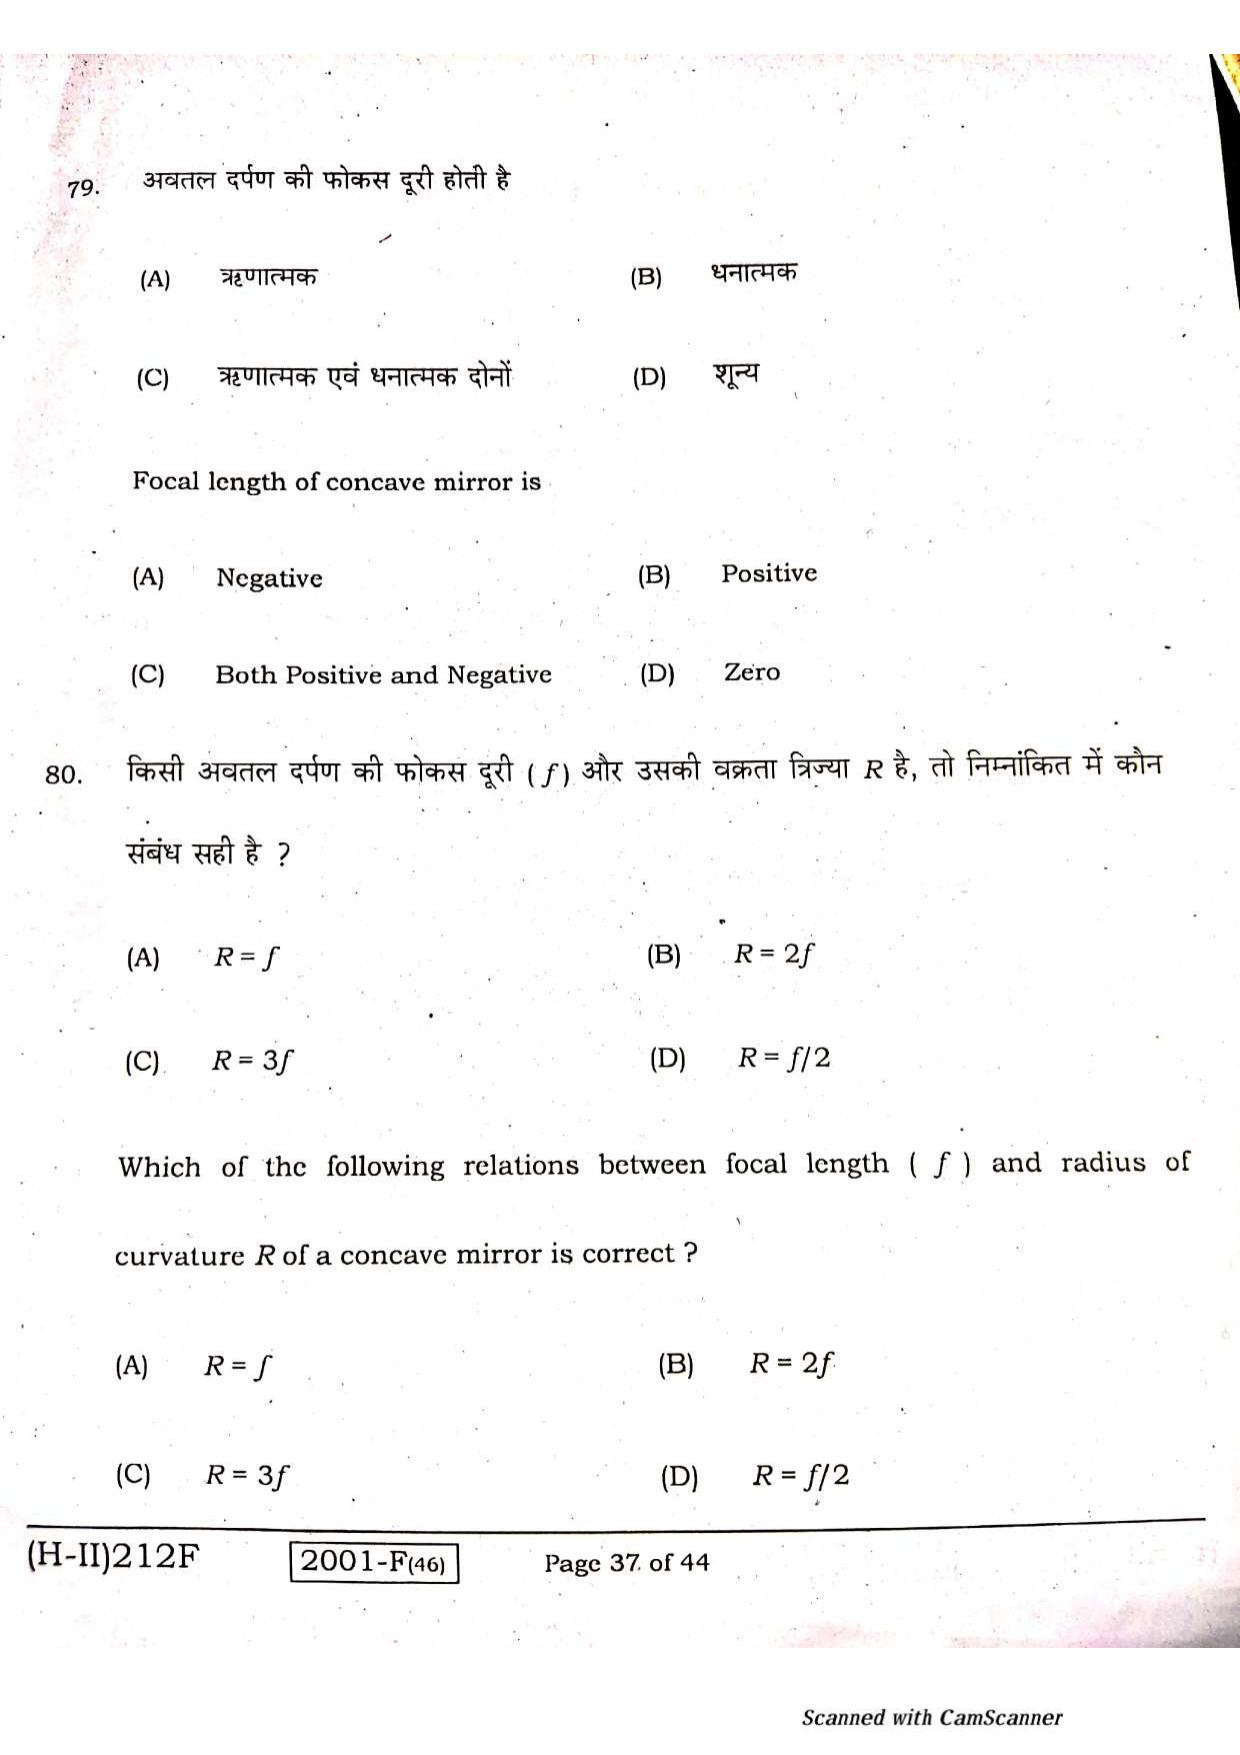 Bihar Board Class 10 Science 2021 (2nd Sitting) Question Paper - Page 35